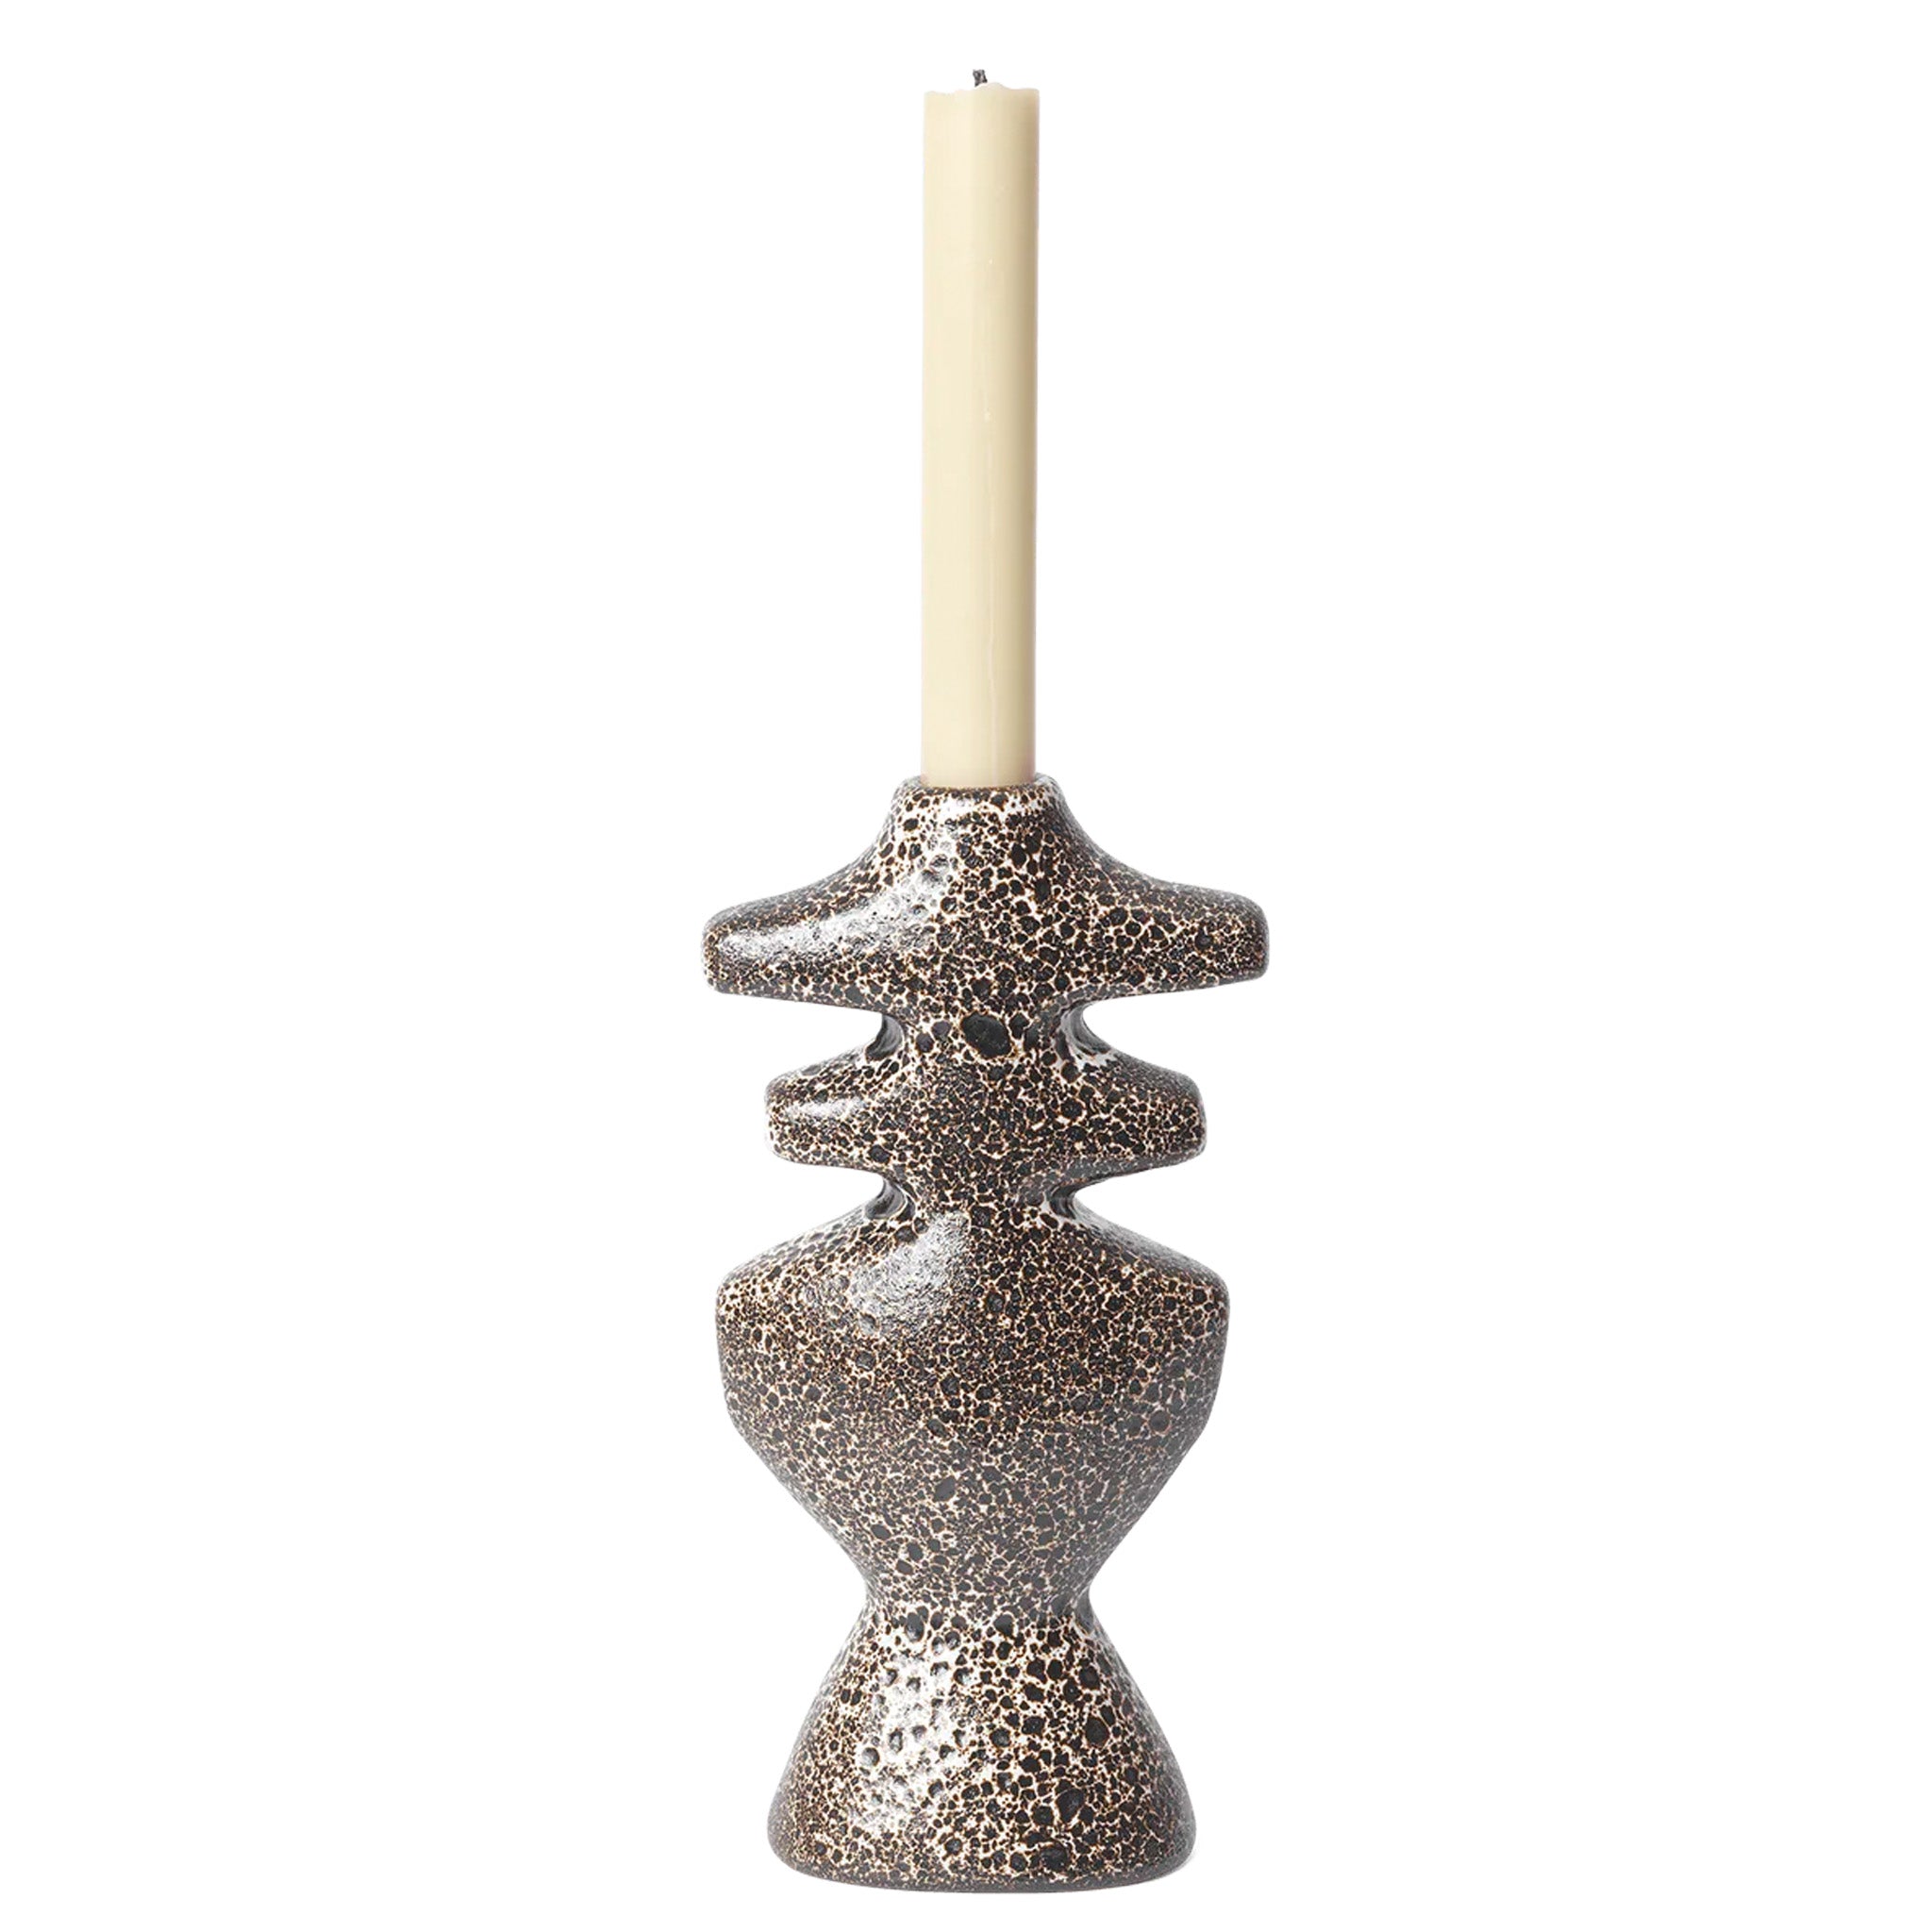 Yara Candle Holder Large / Brown Spot by Ferm Living